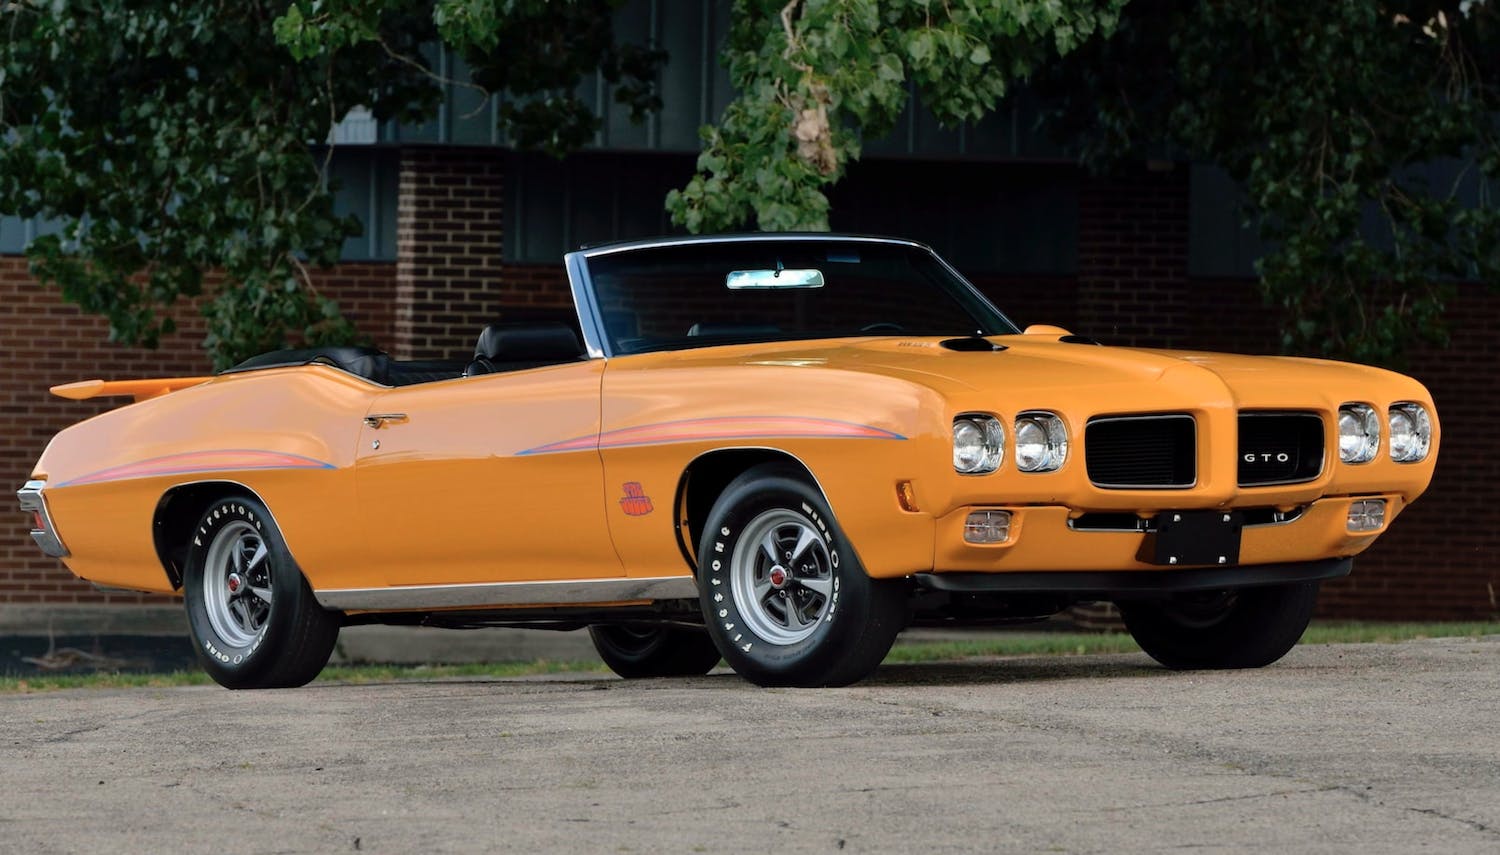 All Rise for the Judge: $ Ram Air IV is world's most expensive GTO -  Hagerty Media